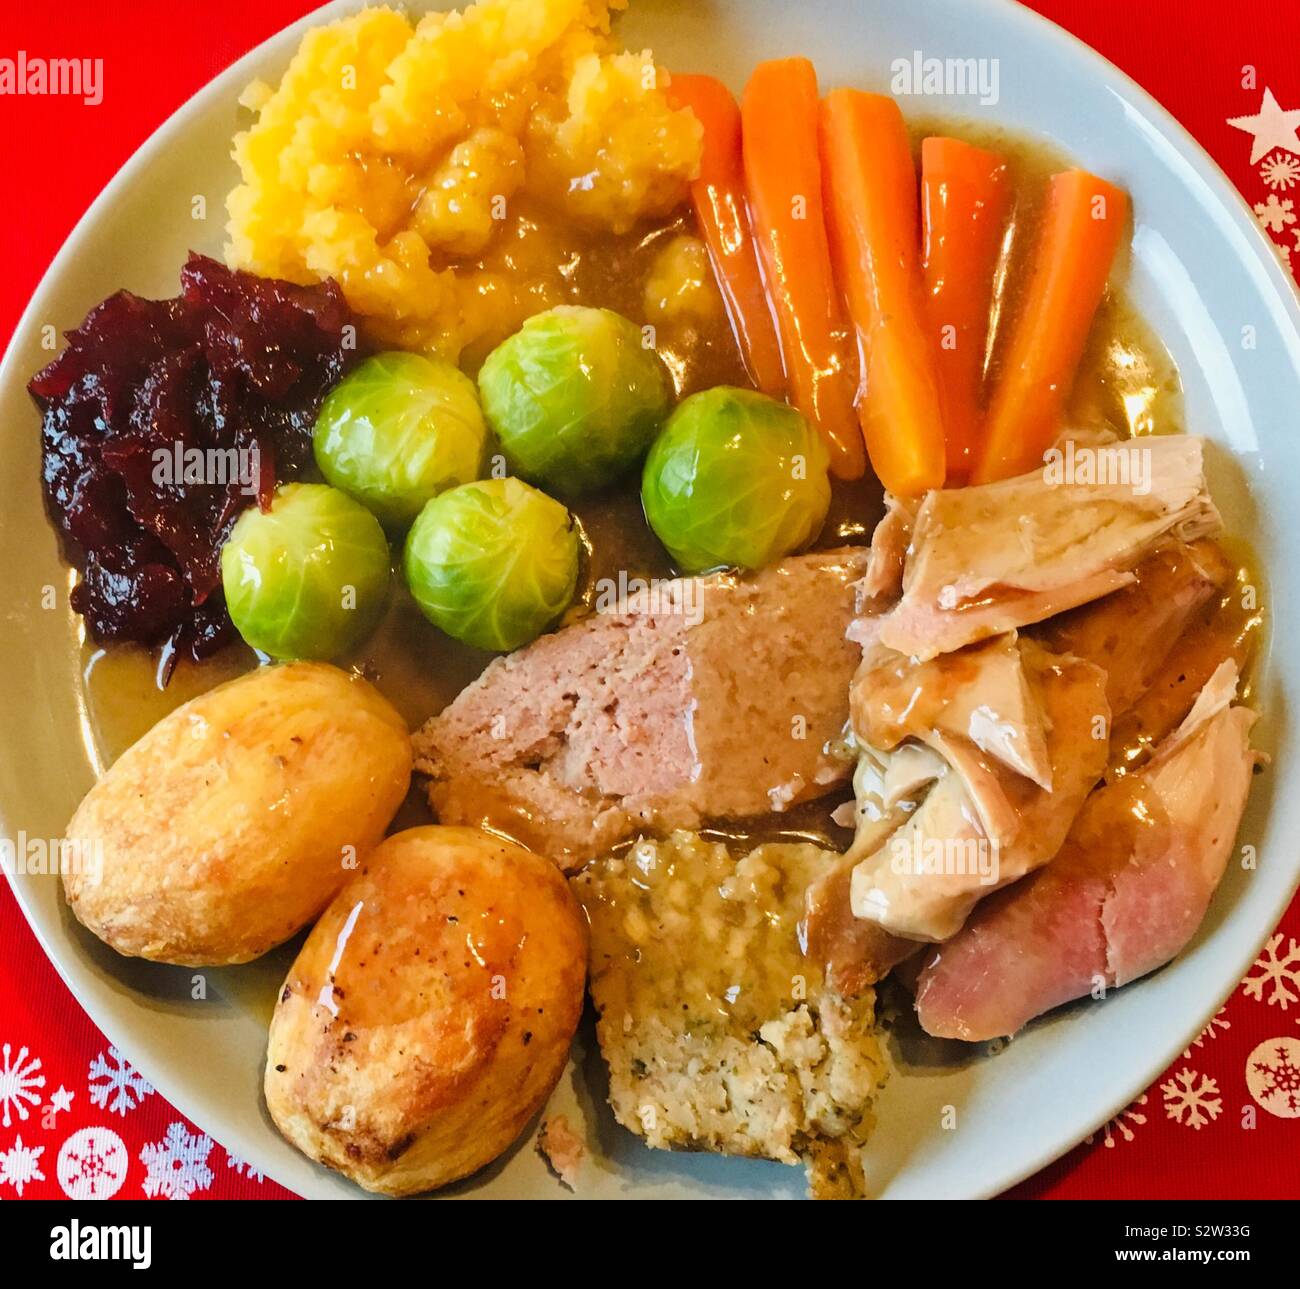 Christmas roast turkey dinner served in a pale plate with a red place mat Stock Photo